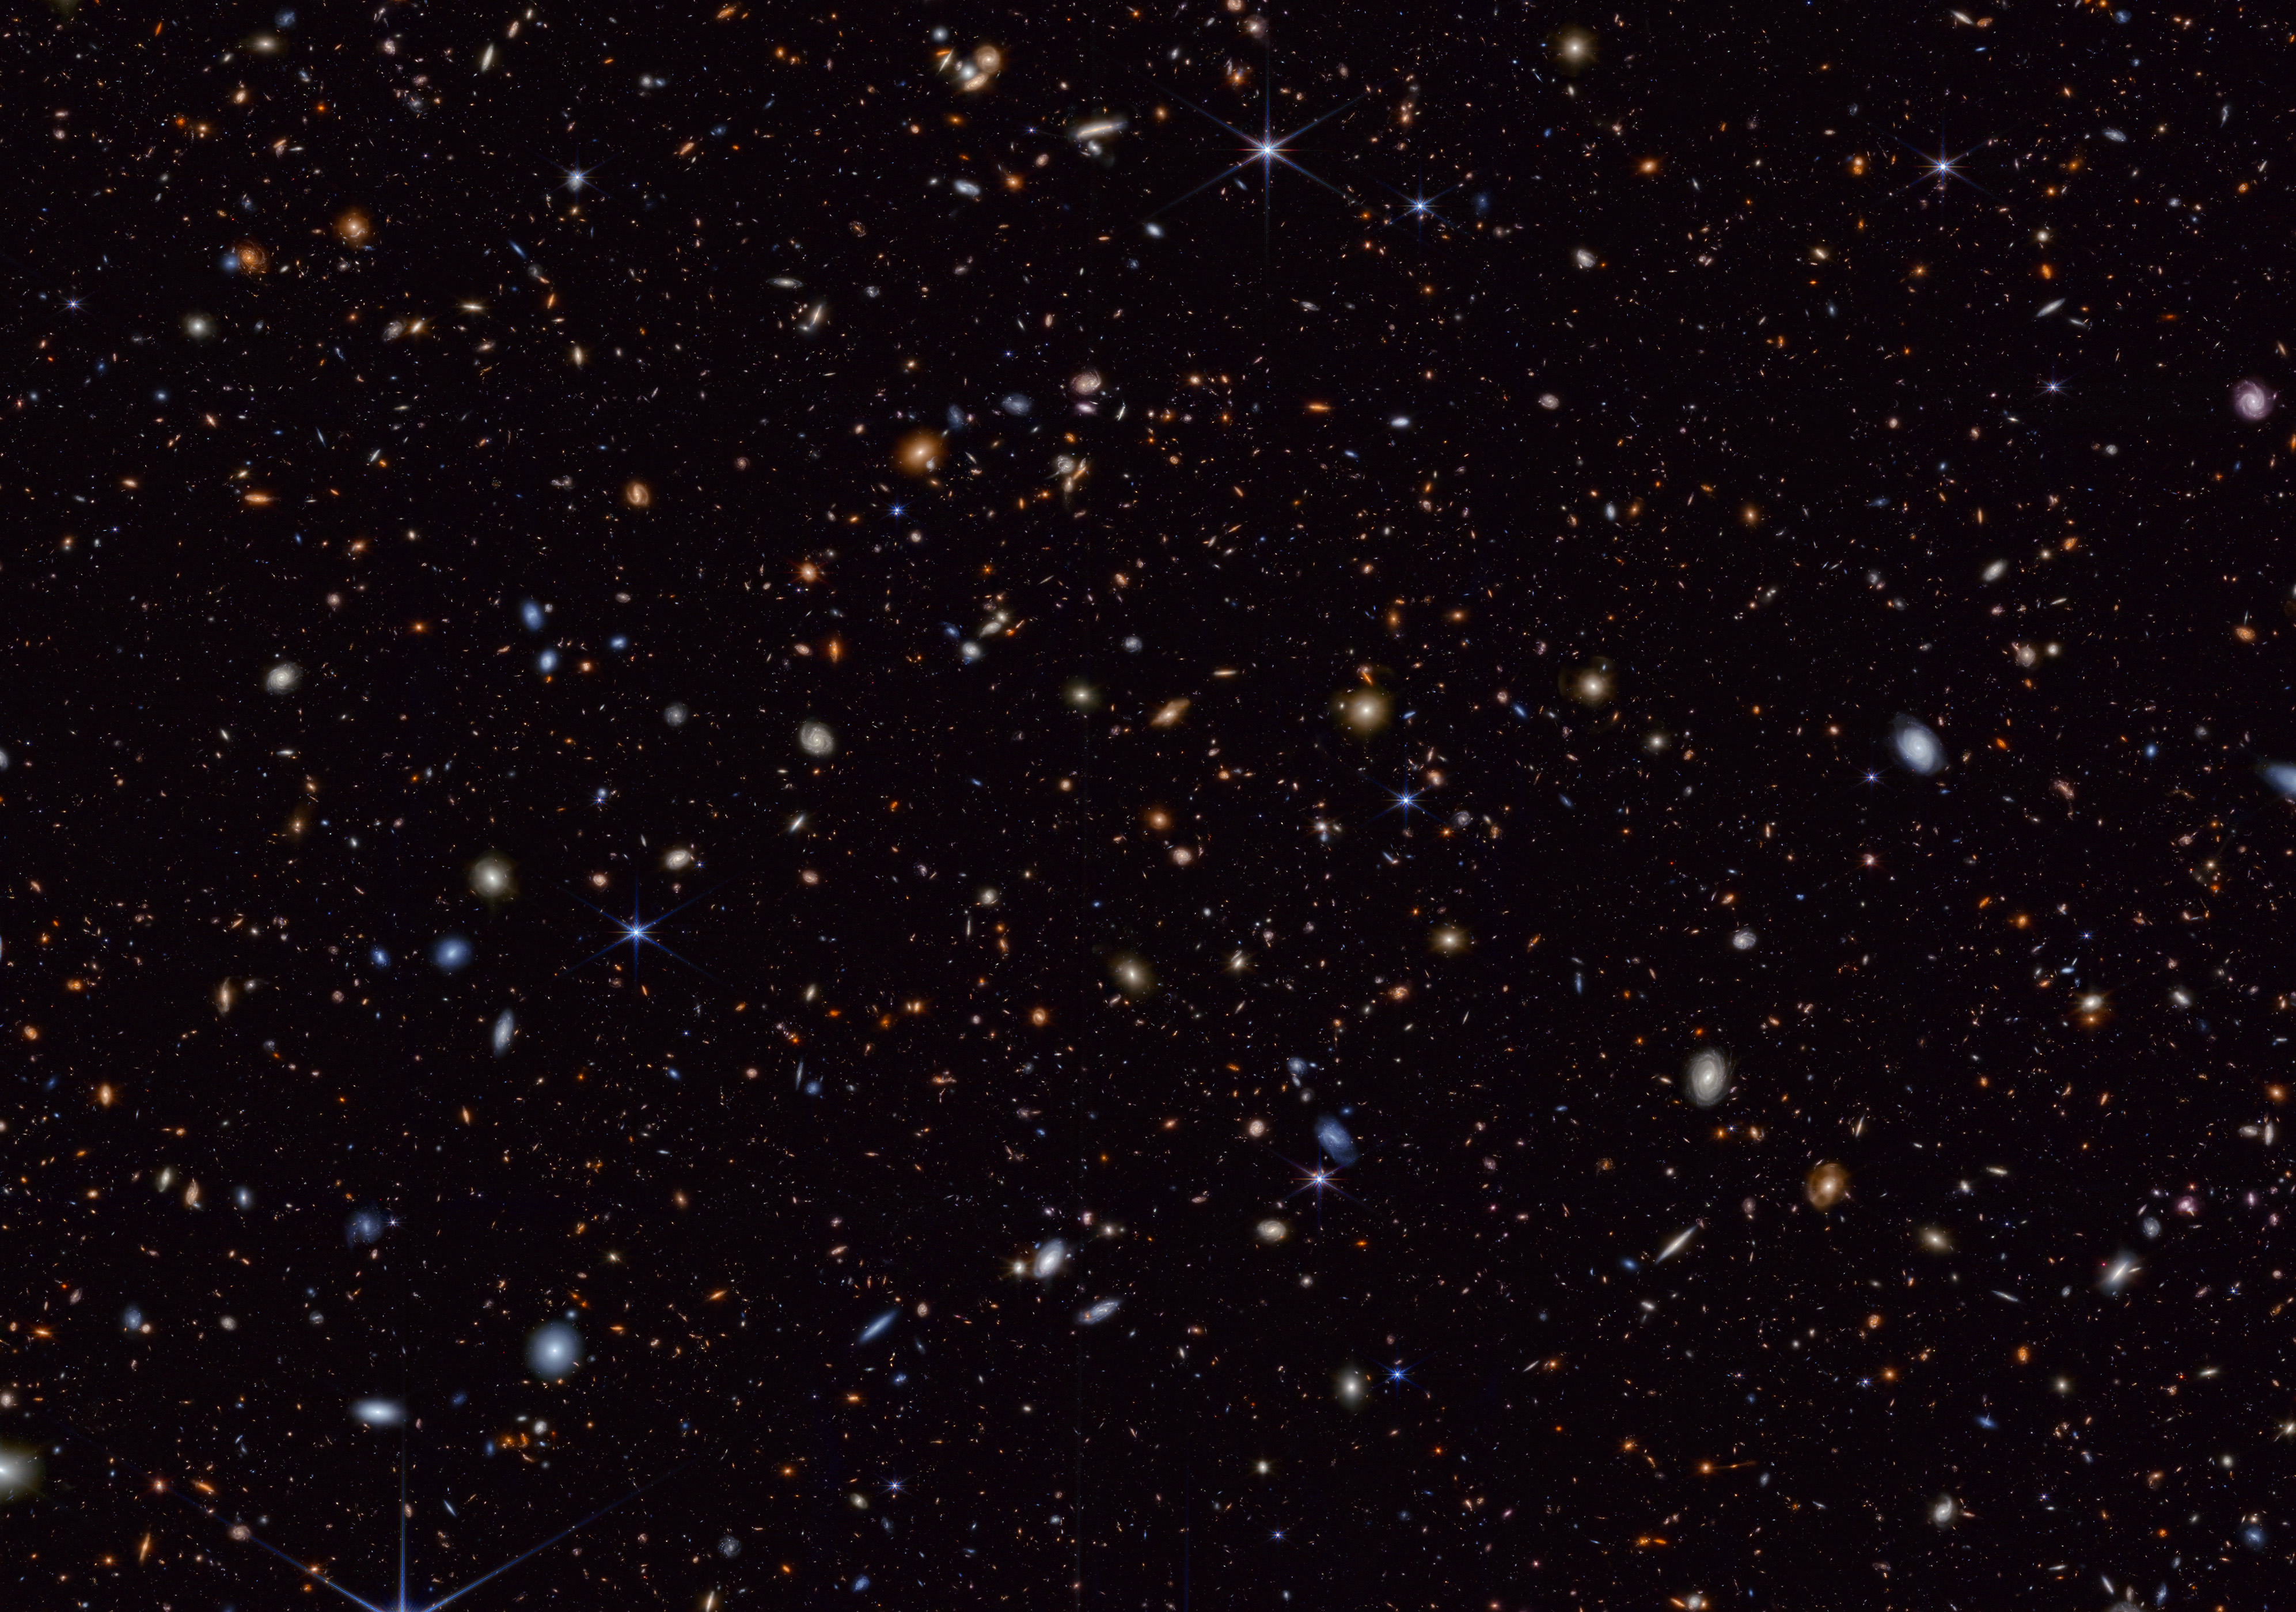 Webb Space telescope deep field image showing hundreds of objects of different colors, shapes, and sizes scattered across the black background of space.